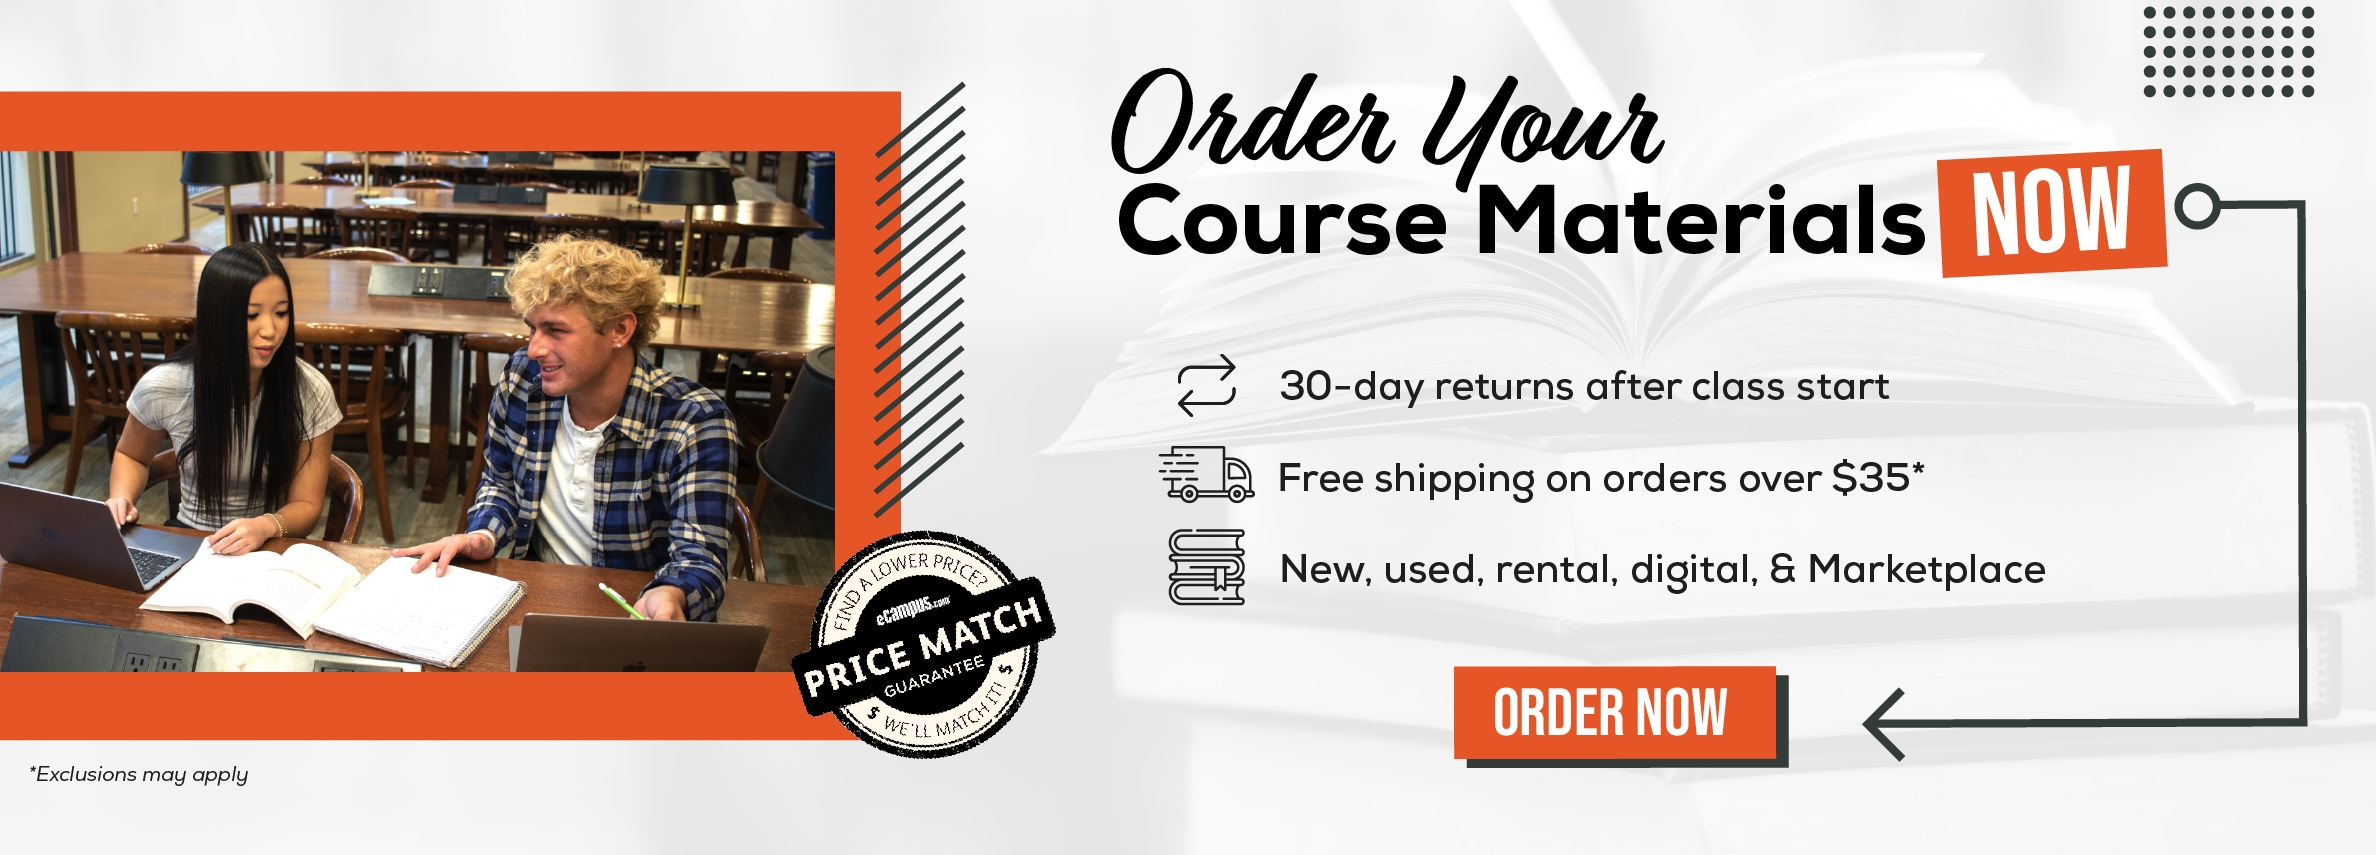 Order Your Course Materials Now. 30-day returns after class start. $7 expedited shipping on orders over $35* New, used, rental, digital, & Marketplace. Order now. *Exclusions may apply.